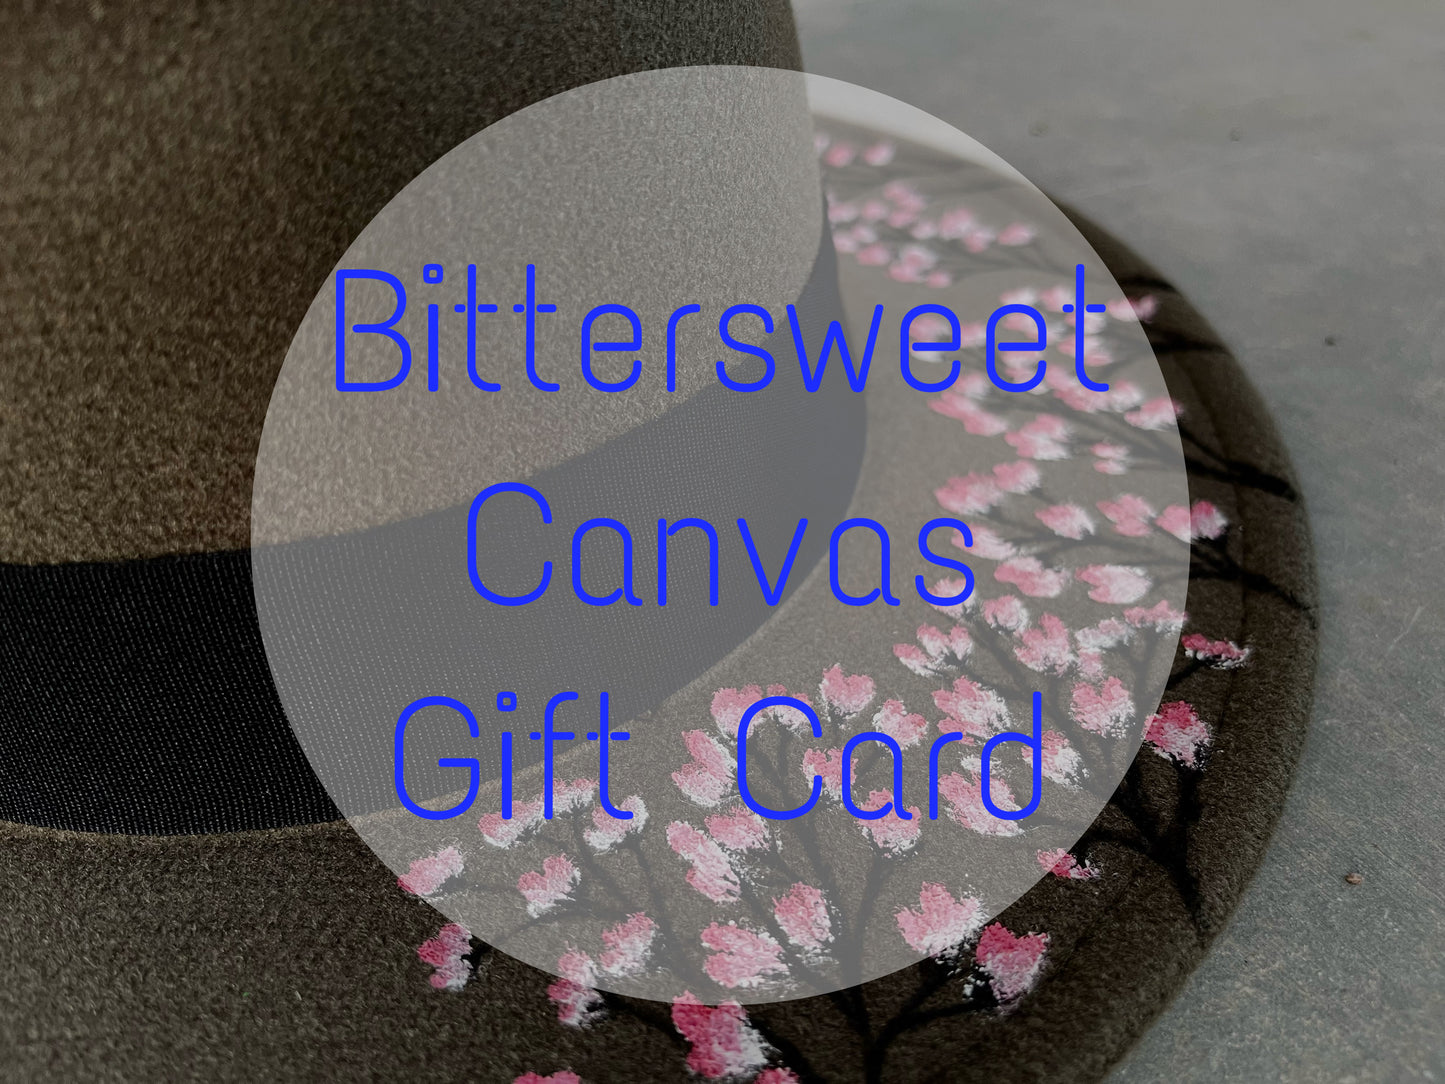 Bittersweet Canvas Gift Card